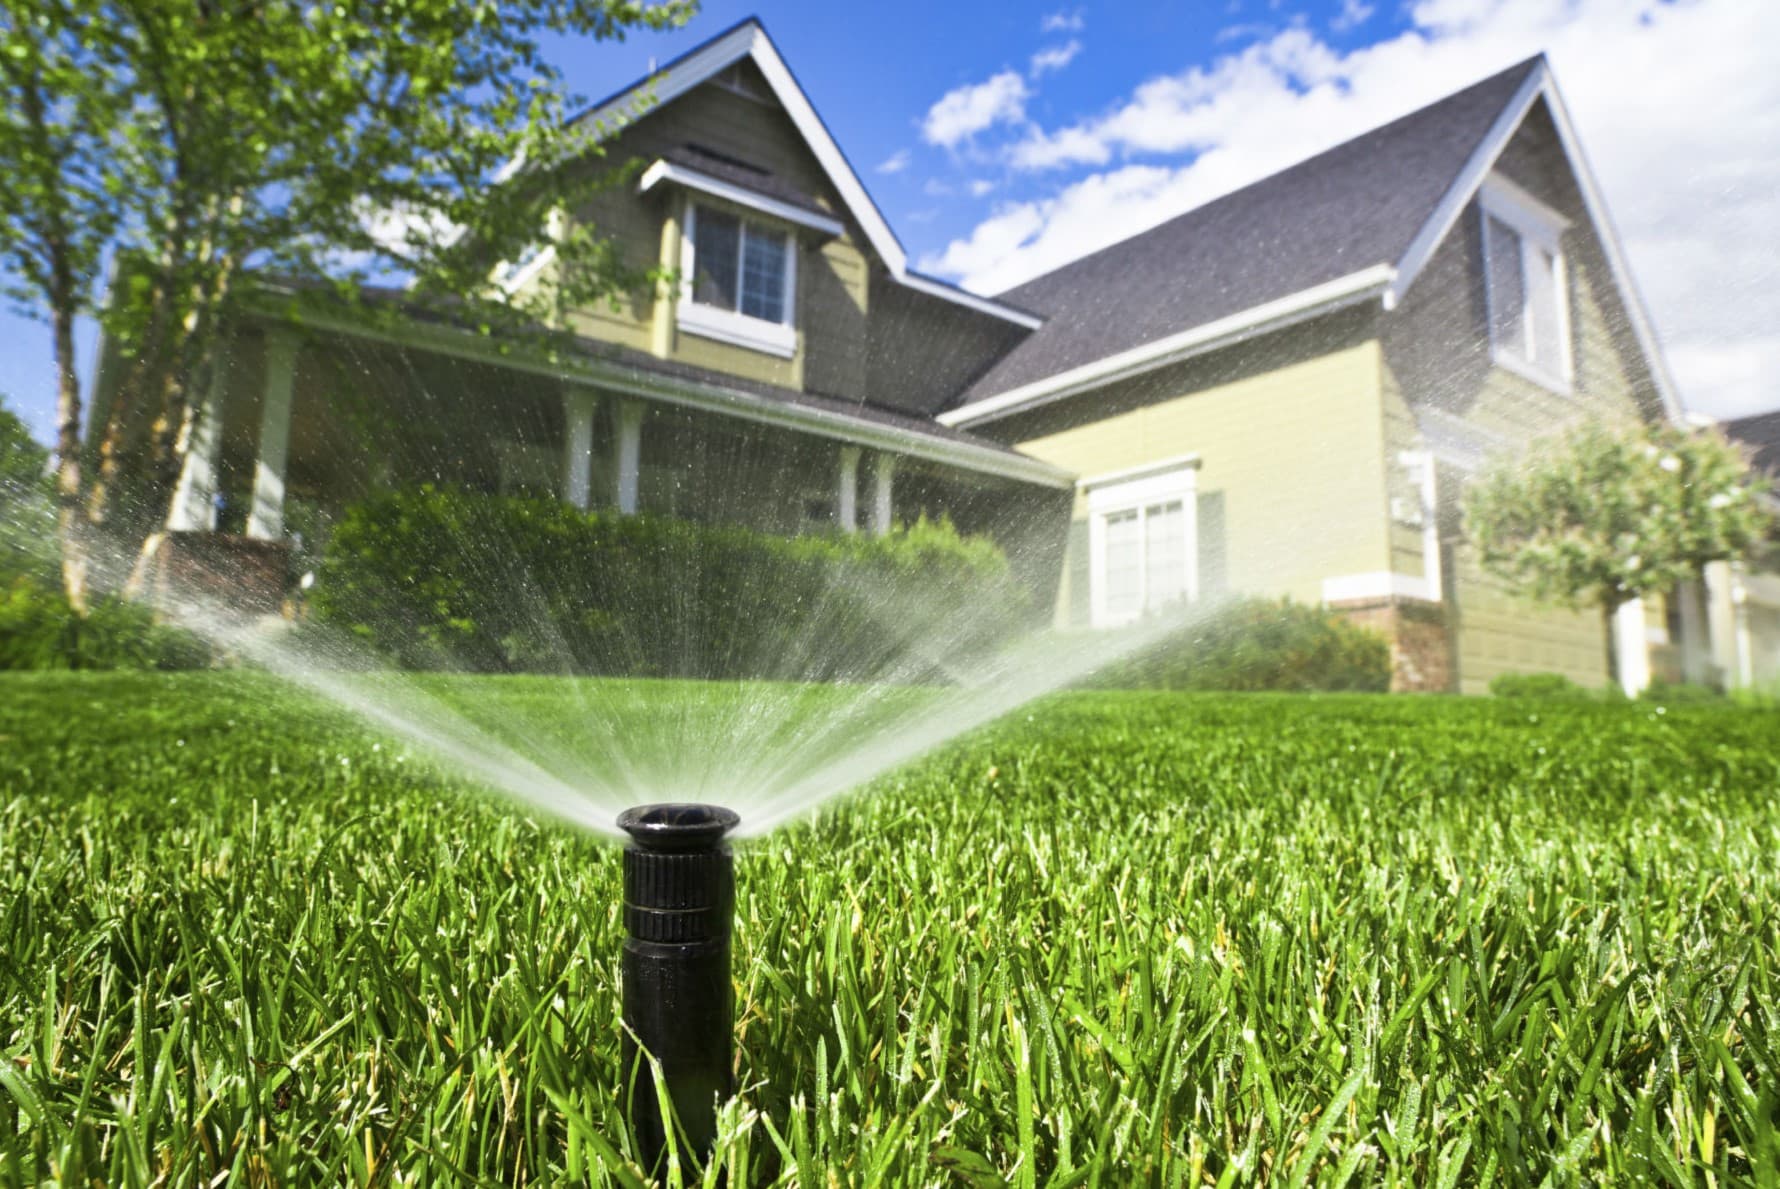 How Often To Water My Grass In 100 Degree Weather